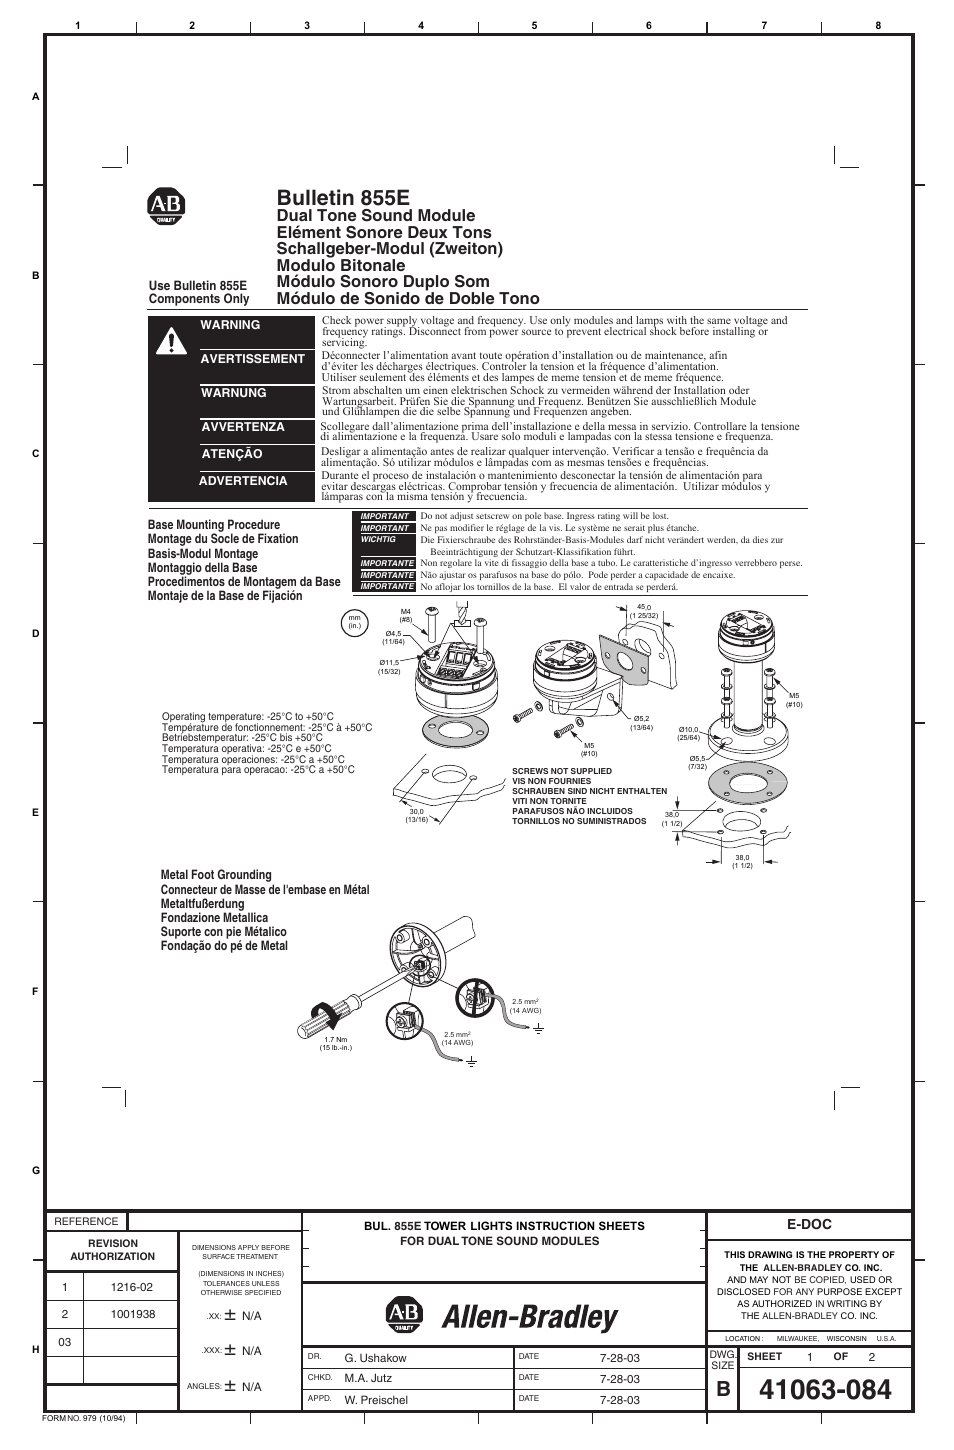 rockwell automation 440rd22ra wiring diagram